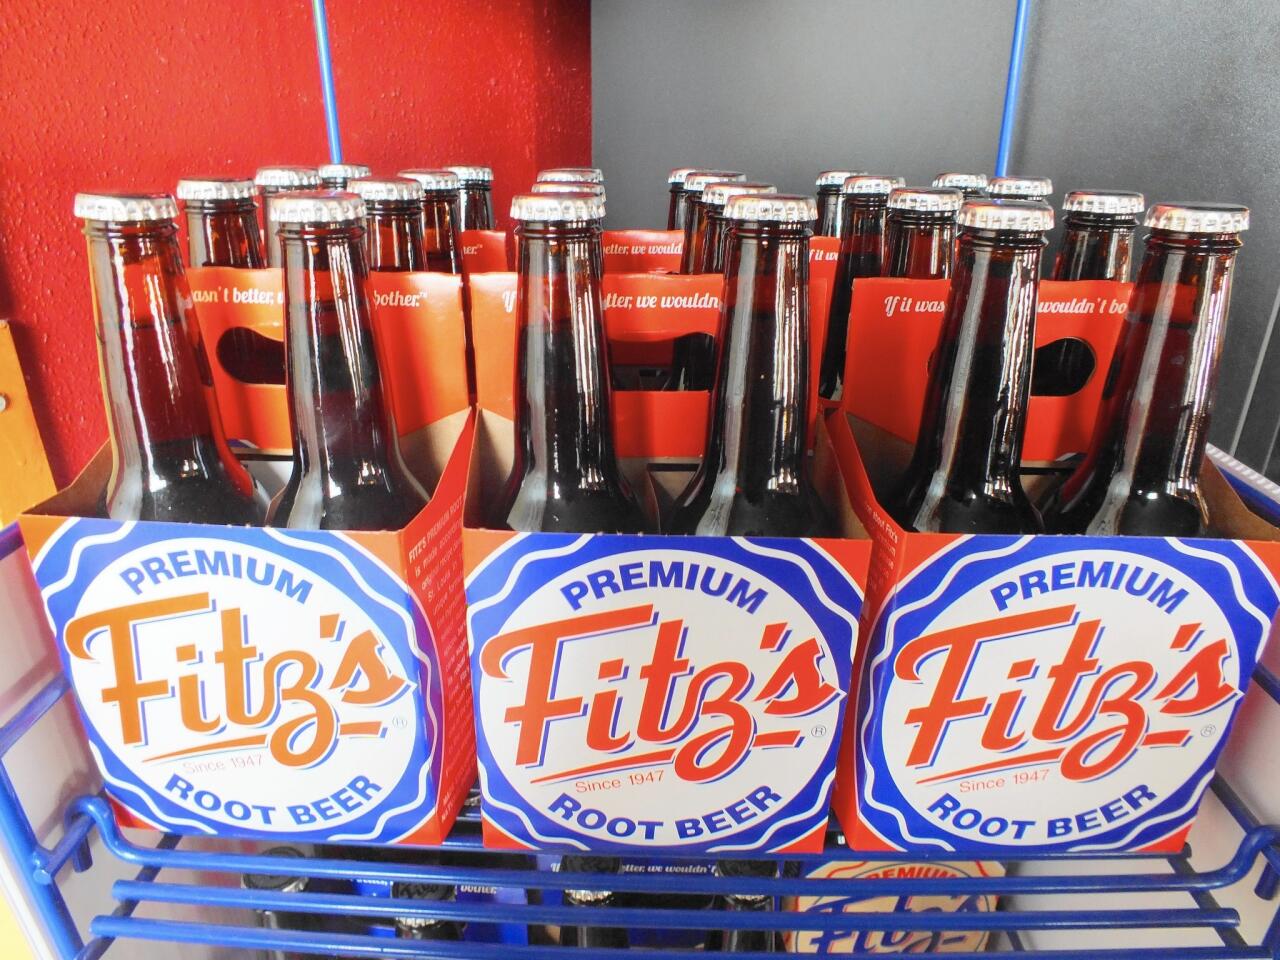 After enjoying a creamy root beer float, customers at Fitz’s can grab a six-pack or two before leaving.